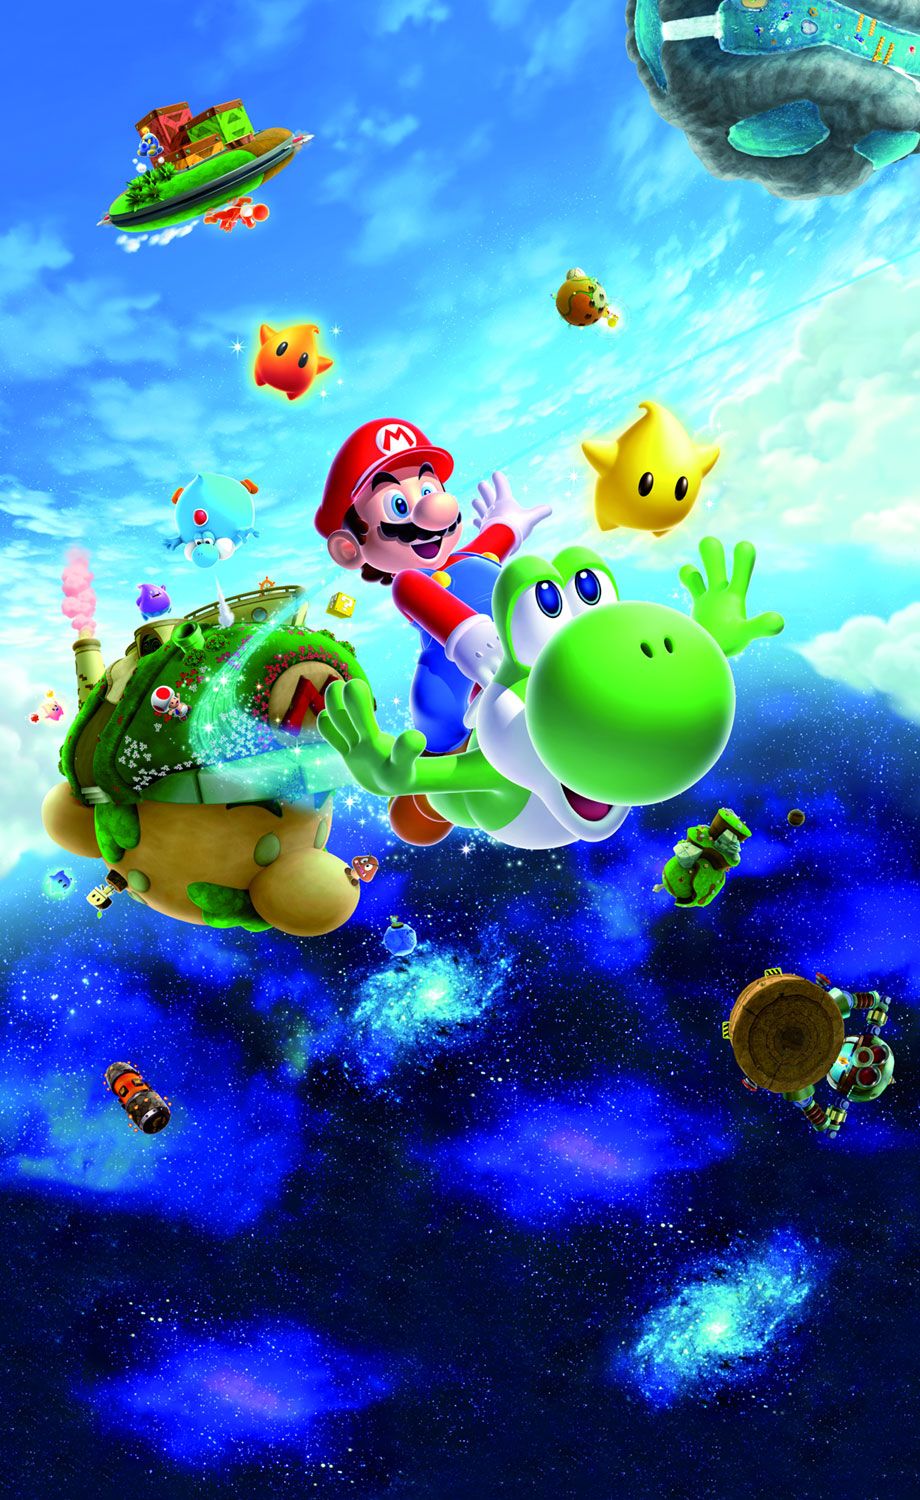 is super mario galaxy 2 coming to switch